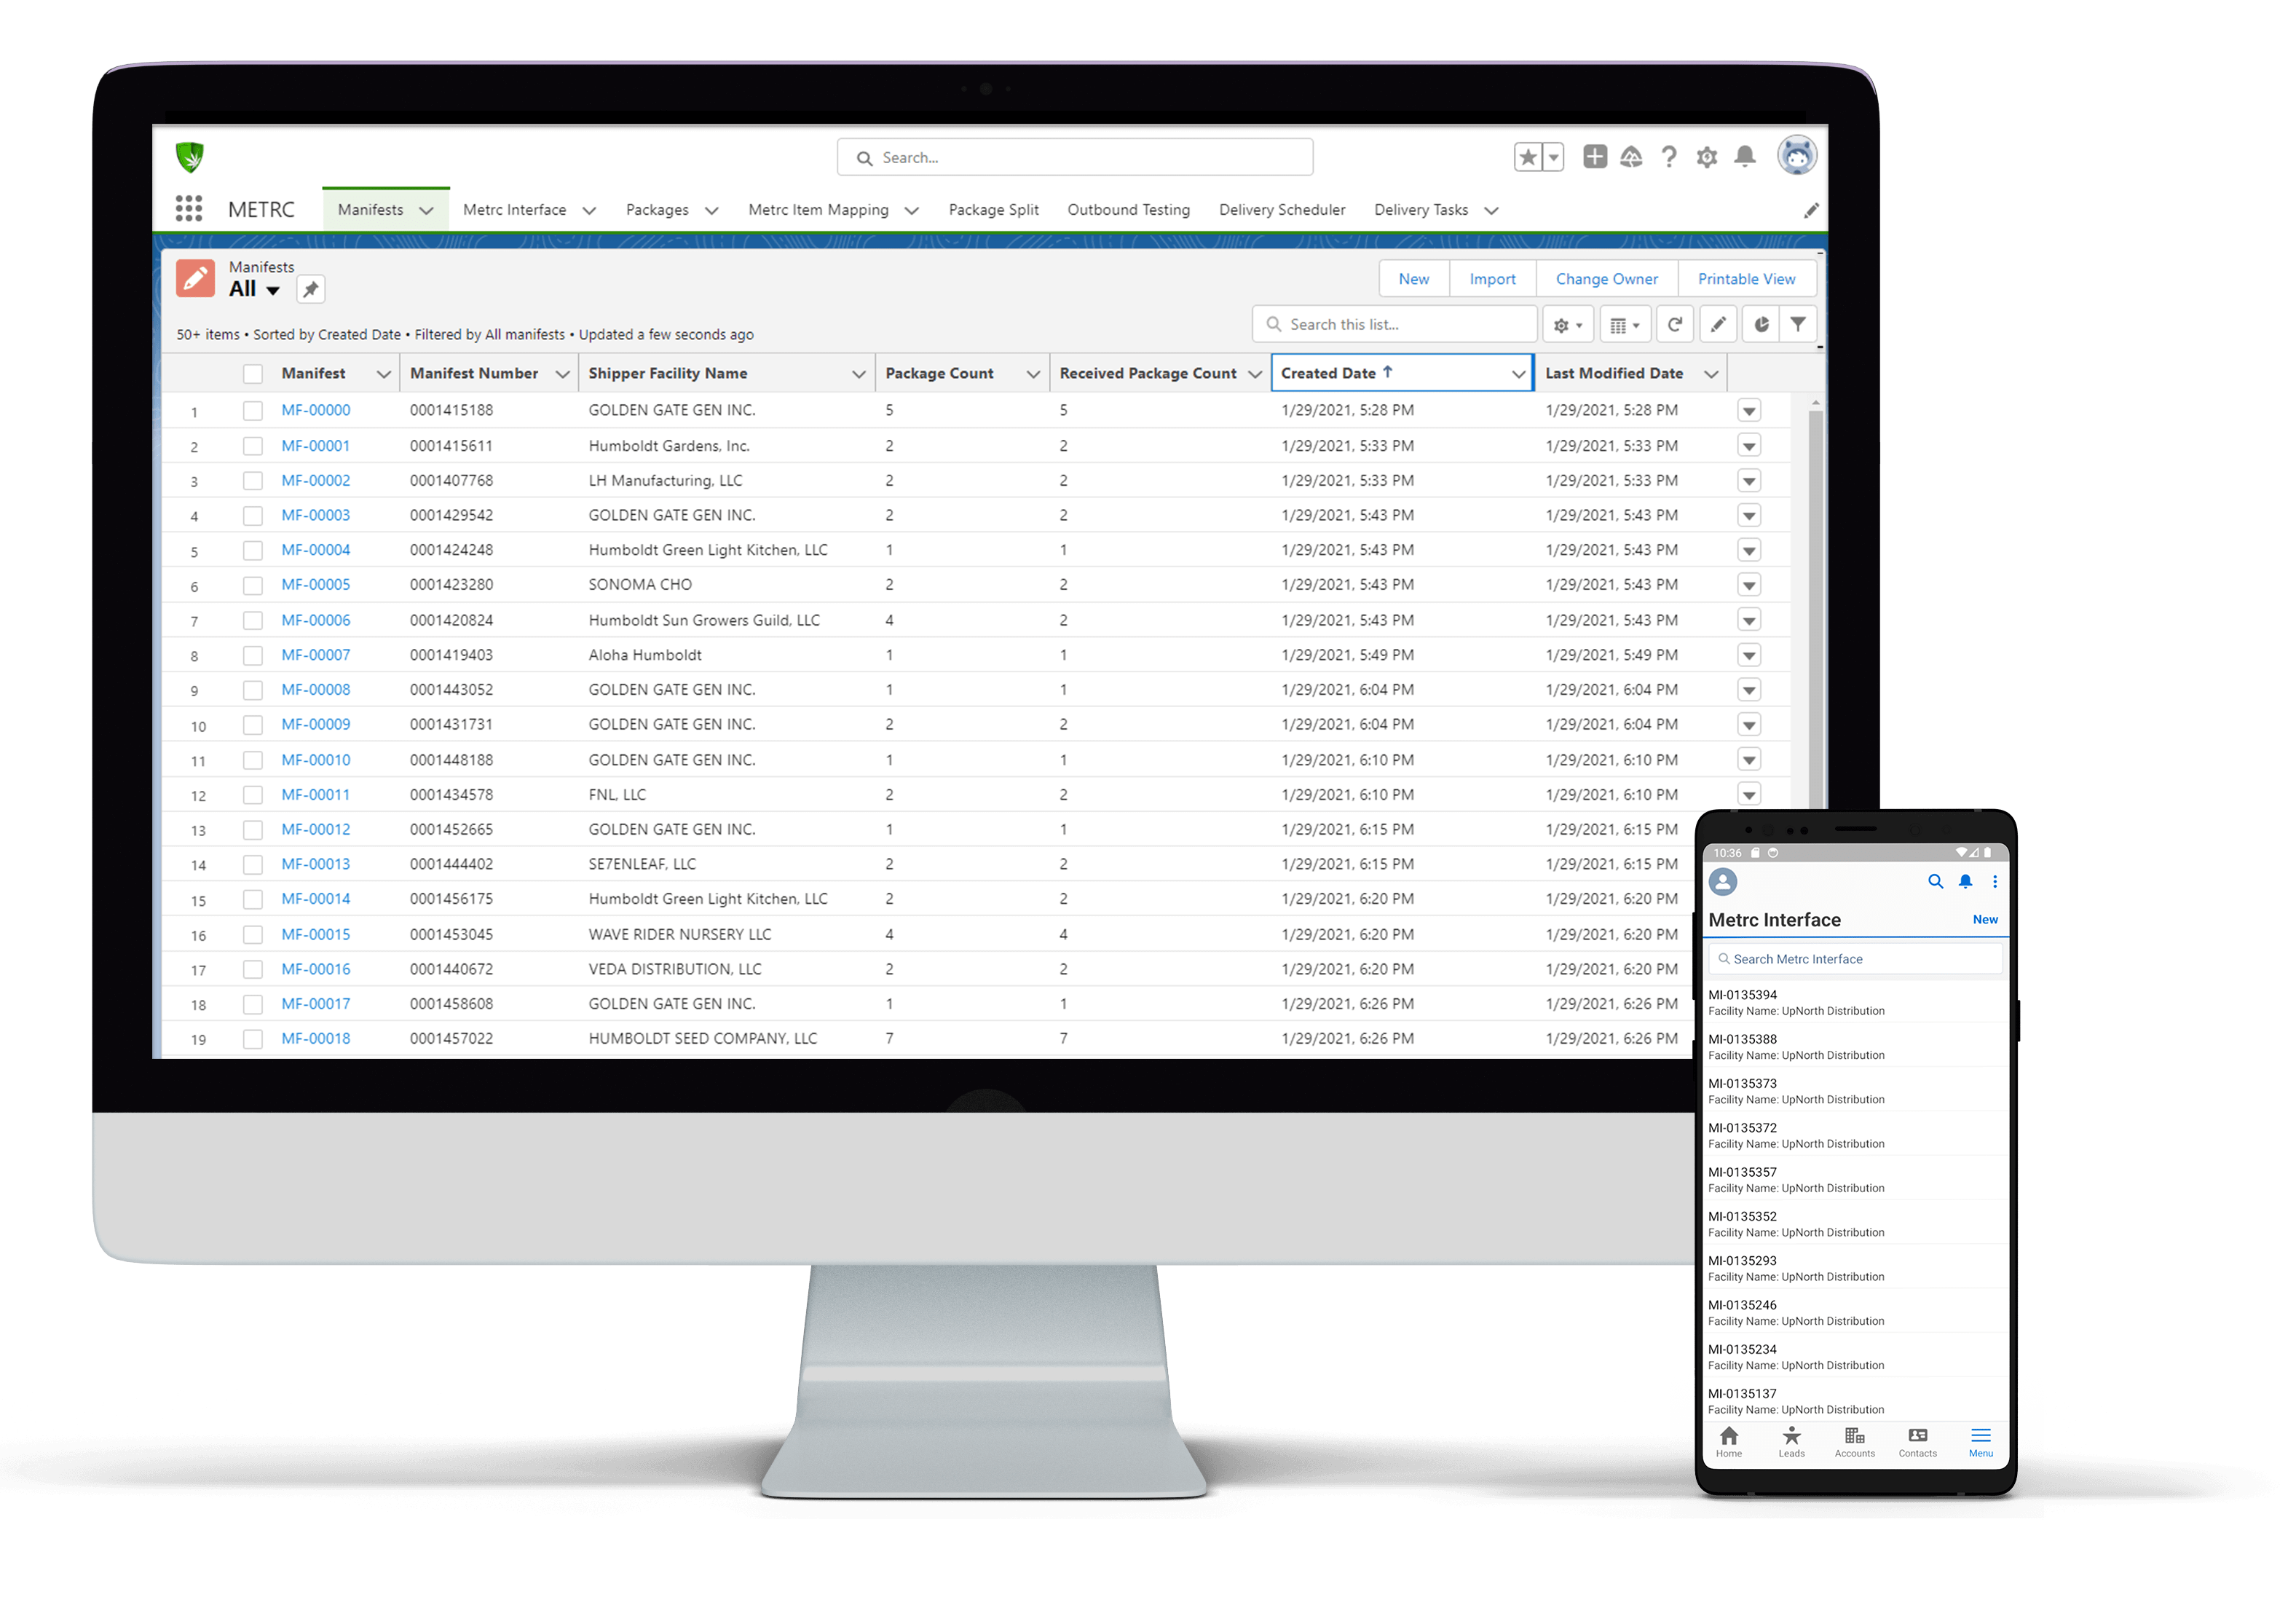 Metrc Monitor displaying the integration with Salesforce and METRC